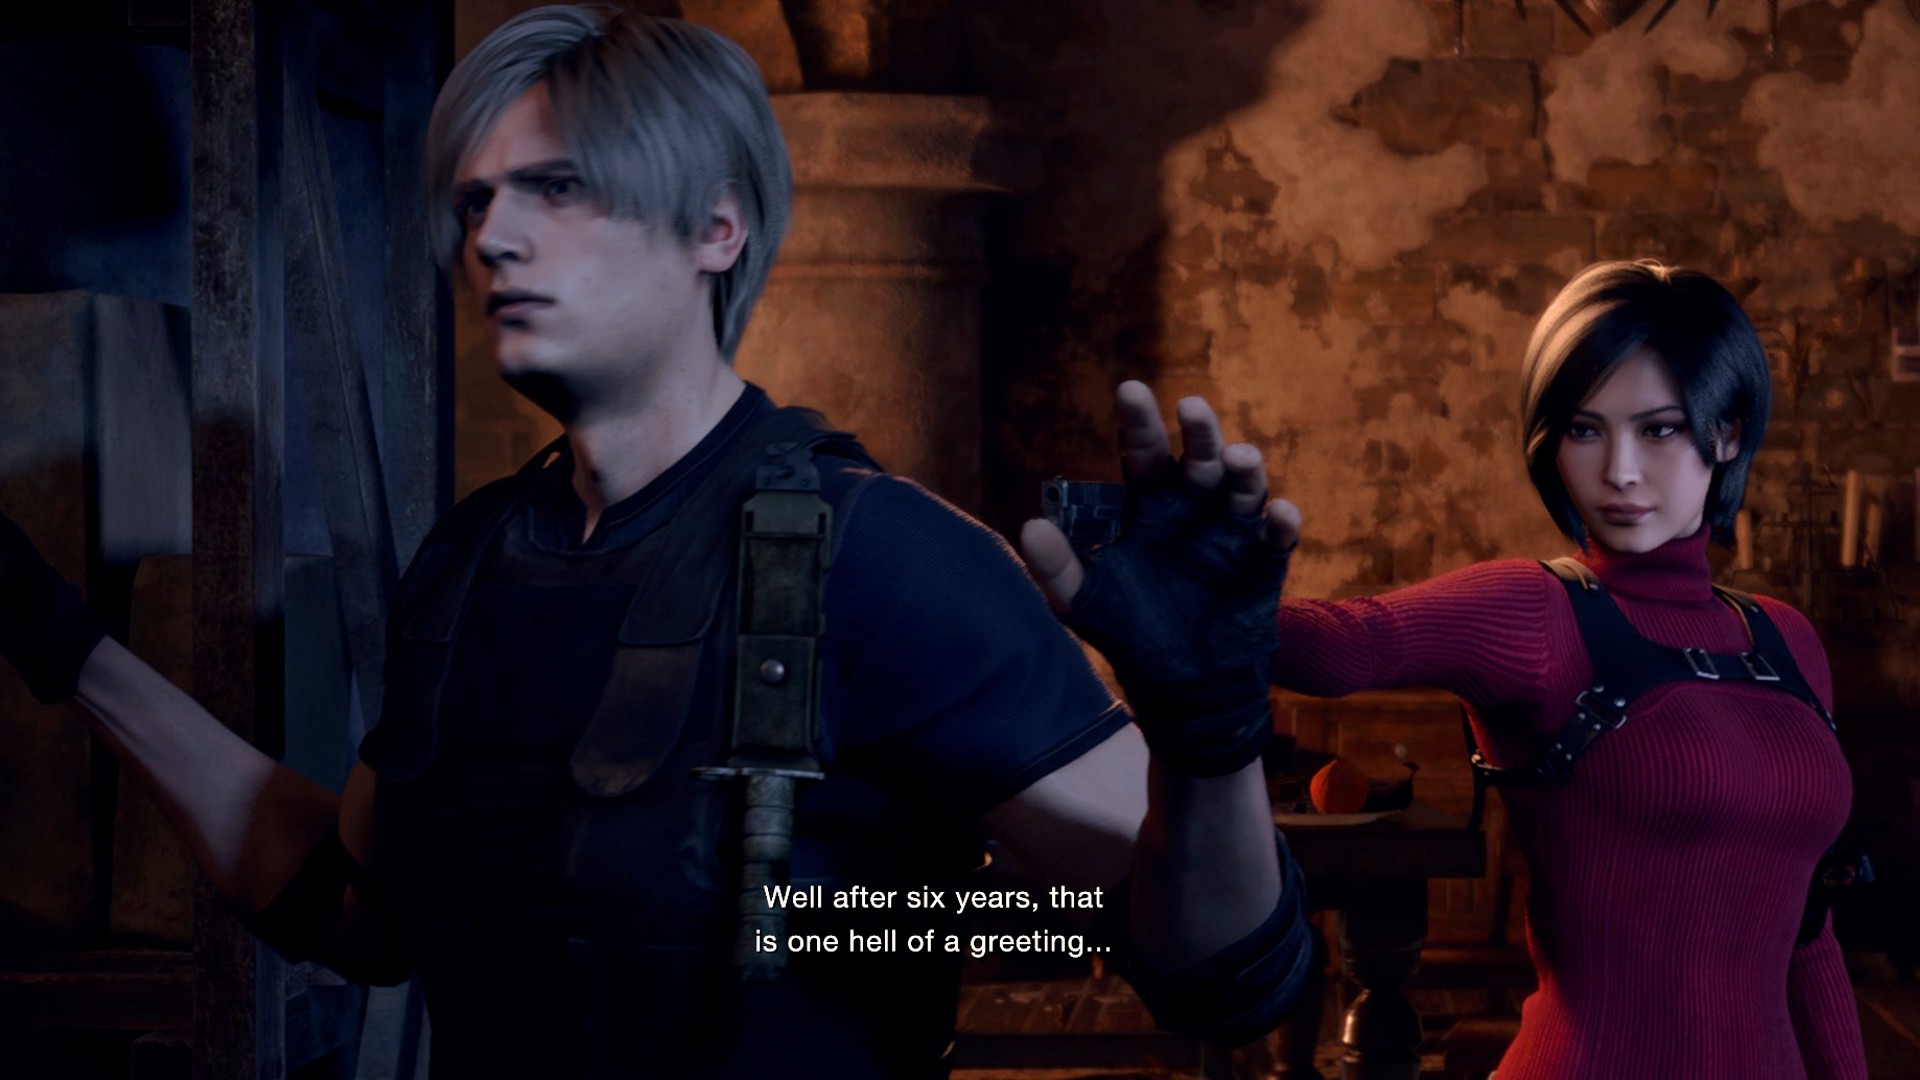 Resident Evil 4 Remake Separate Ways release date